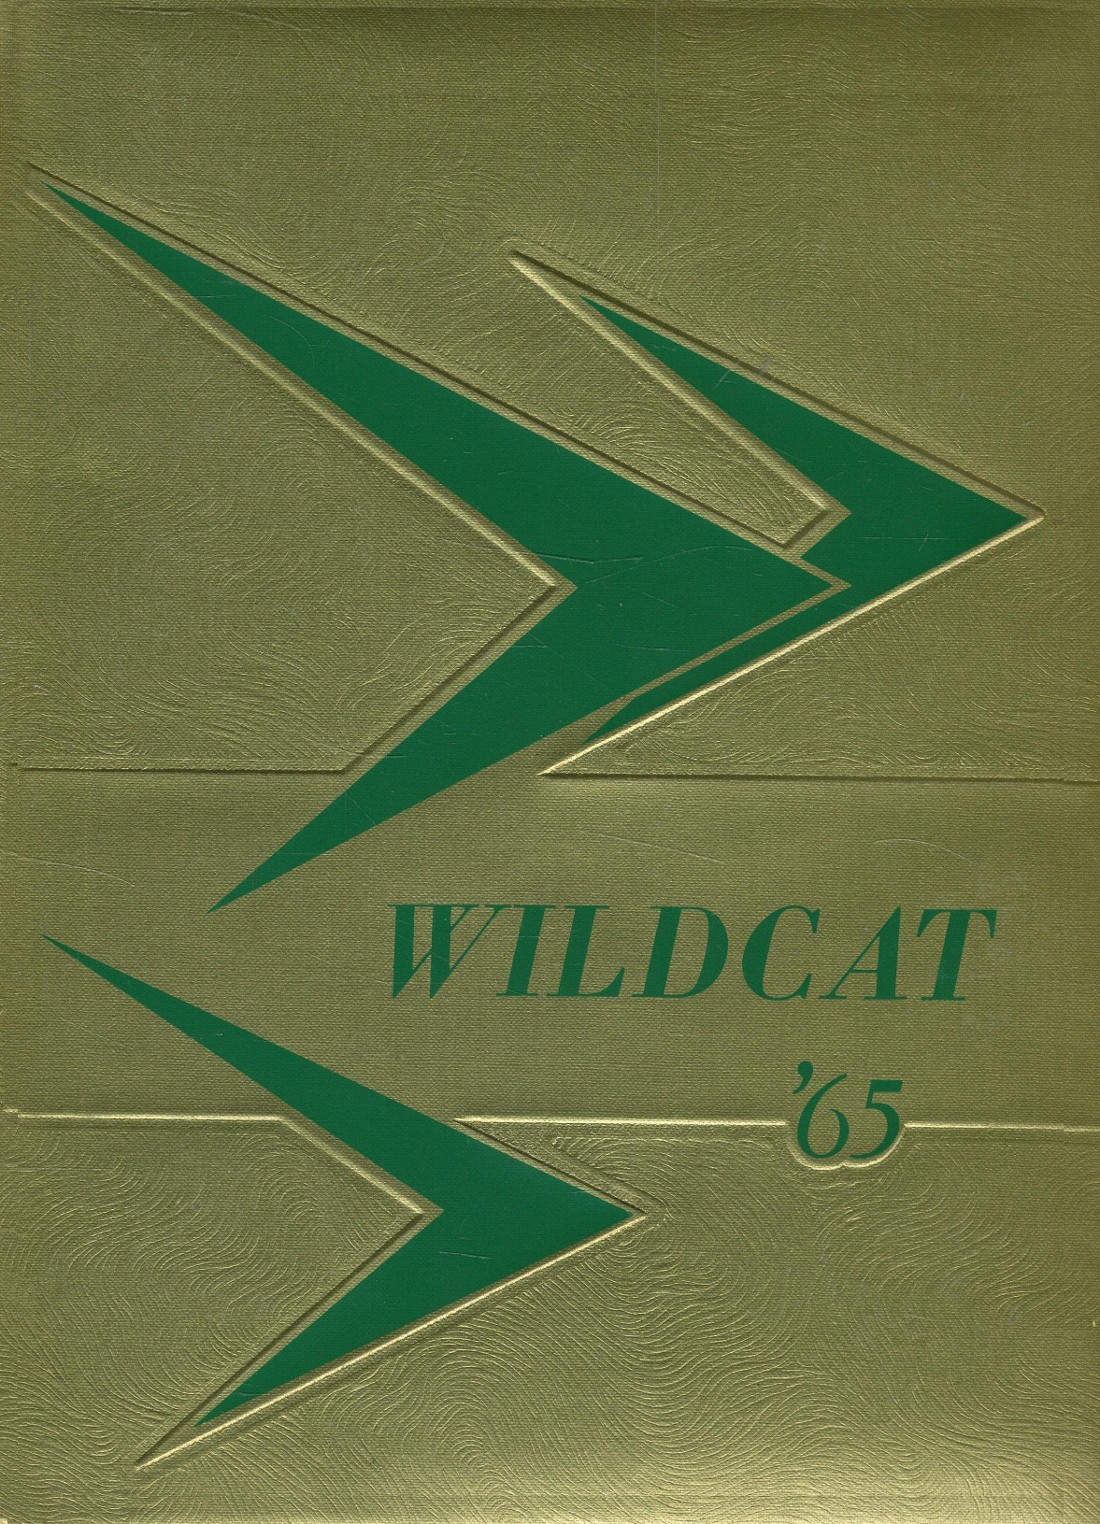 1965 yearbook from Mulvane High School from Mulvane, Kansas for sale